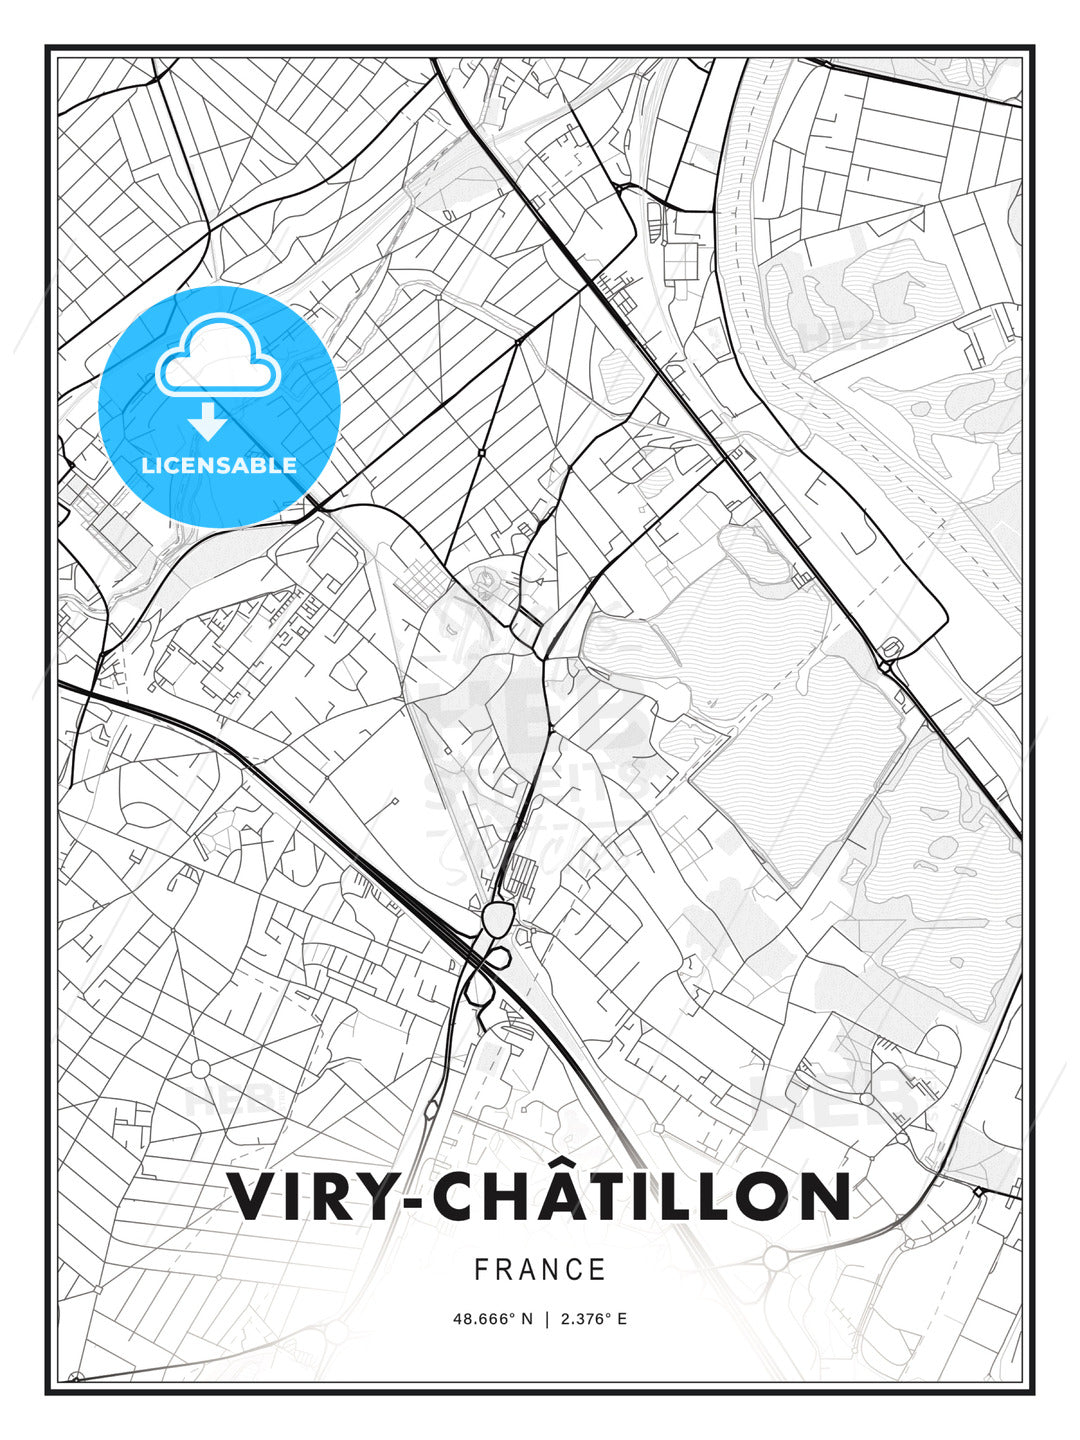 Viry-Châtillon, France, Modern Print Template in Various Formats - HEBSTREITS Sketches